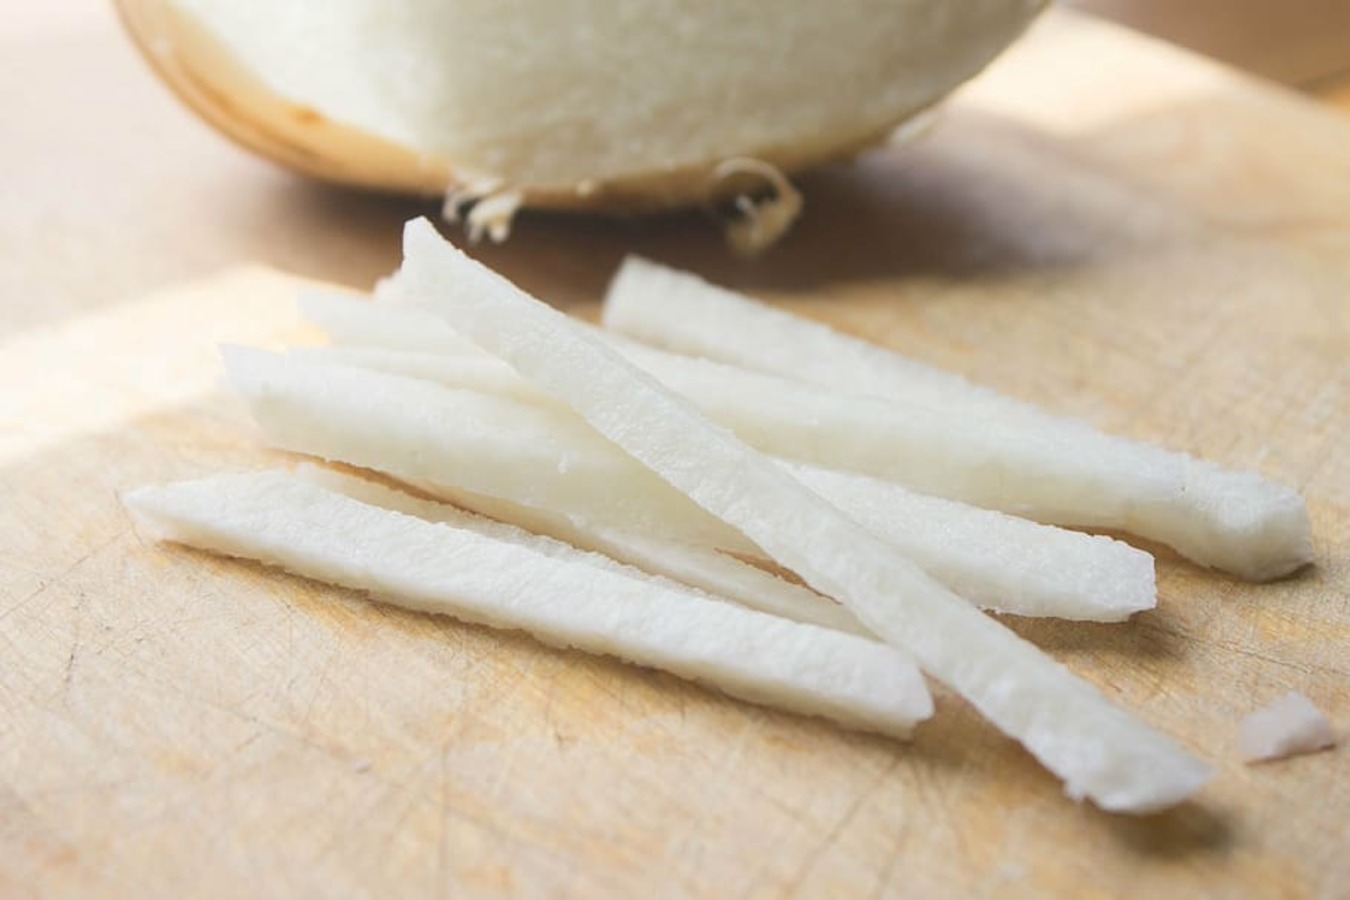 Furthermore, jicama is a great source of prebiotics, which are non-digestible carbohydrates that act as food for beneficial gut bacteria. By promoting the growth of these good bacteria, jicama can help improve digestion, enhance nutrient absorption, and support overall gut health.